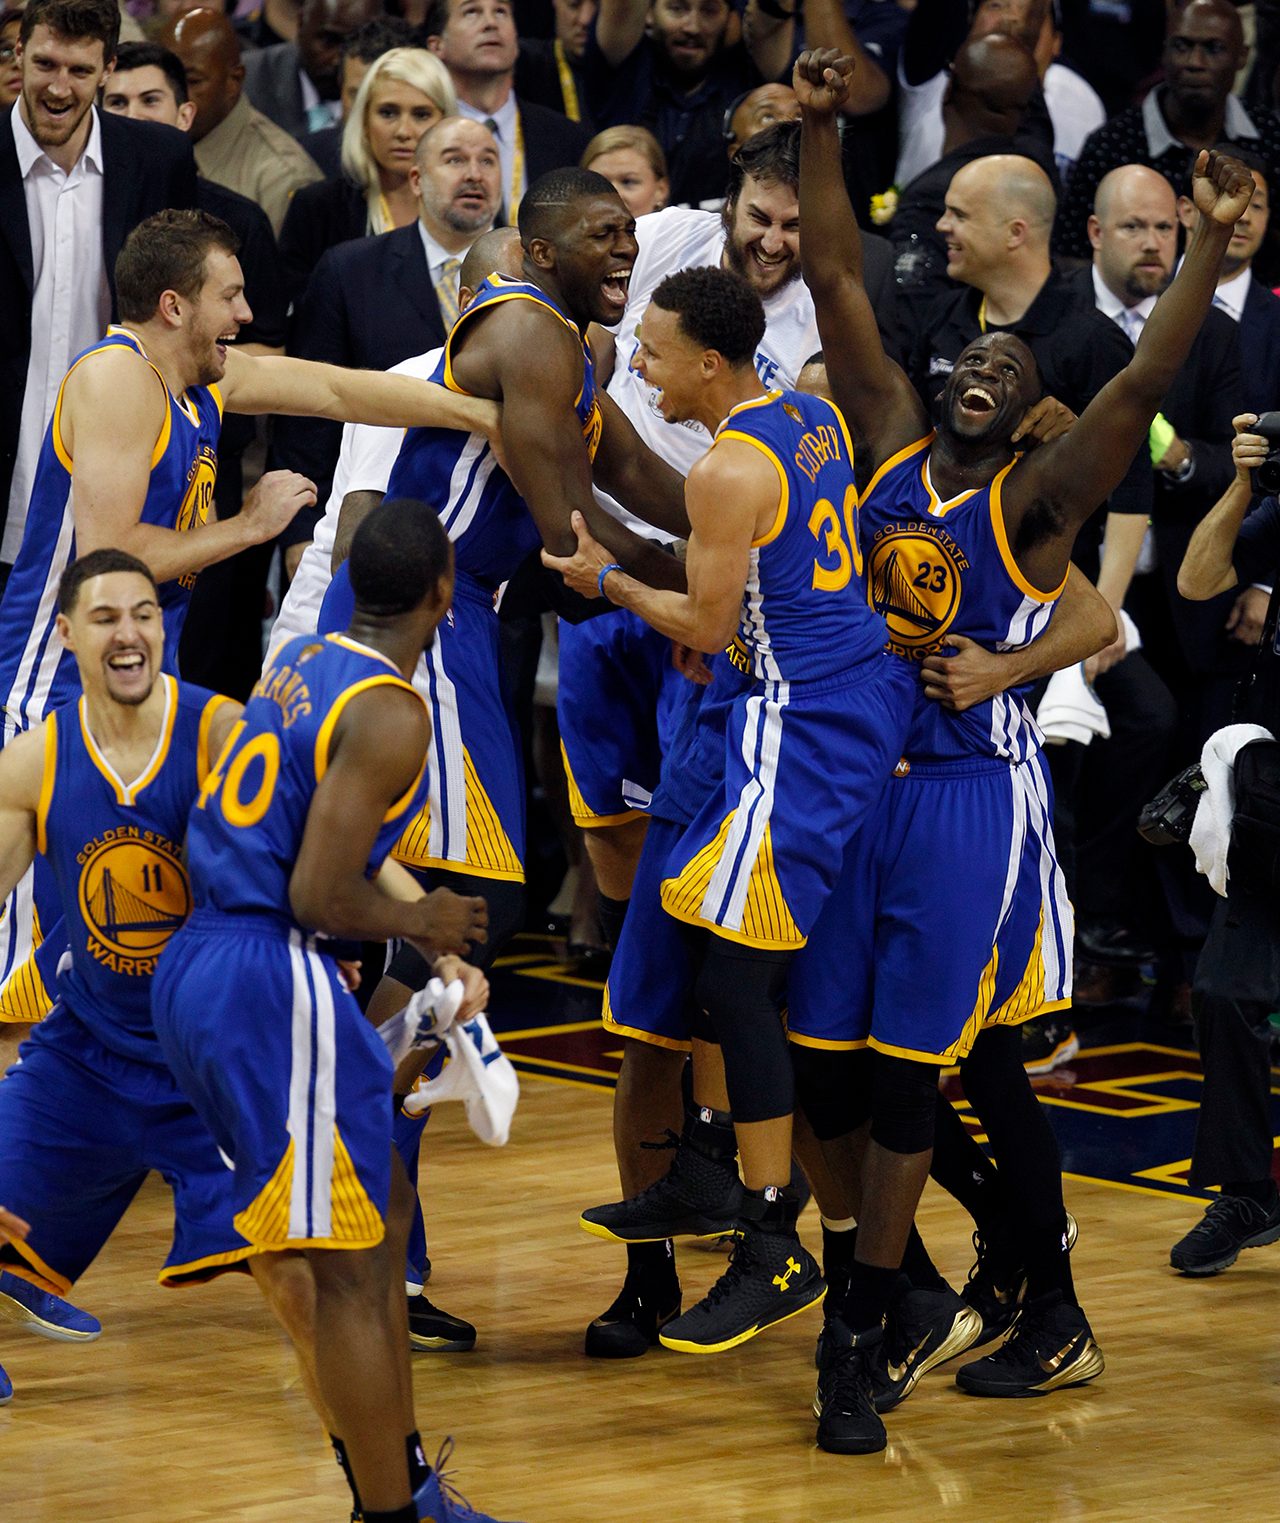 WINNING MOMENT. Stephen Curry (C) and his teammates celebrate as the final buzzer of game 6 sounded and they won the 2015 NBA title. Photo by DAVID MAXWELL/EPA 